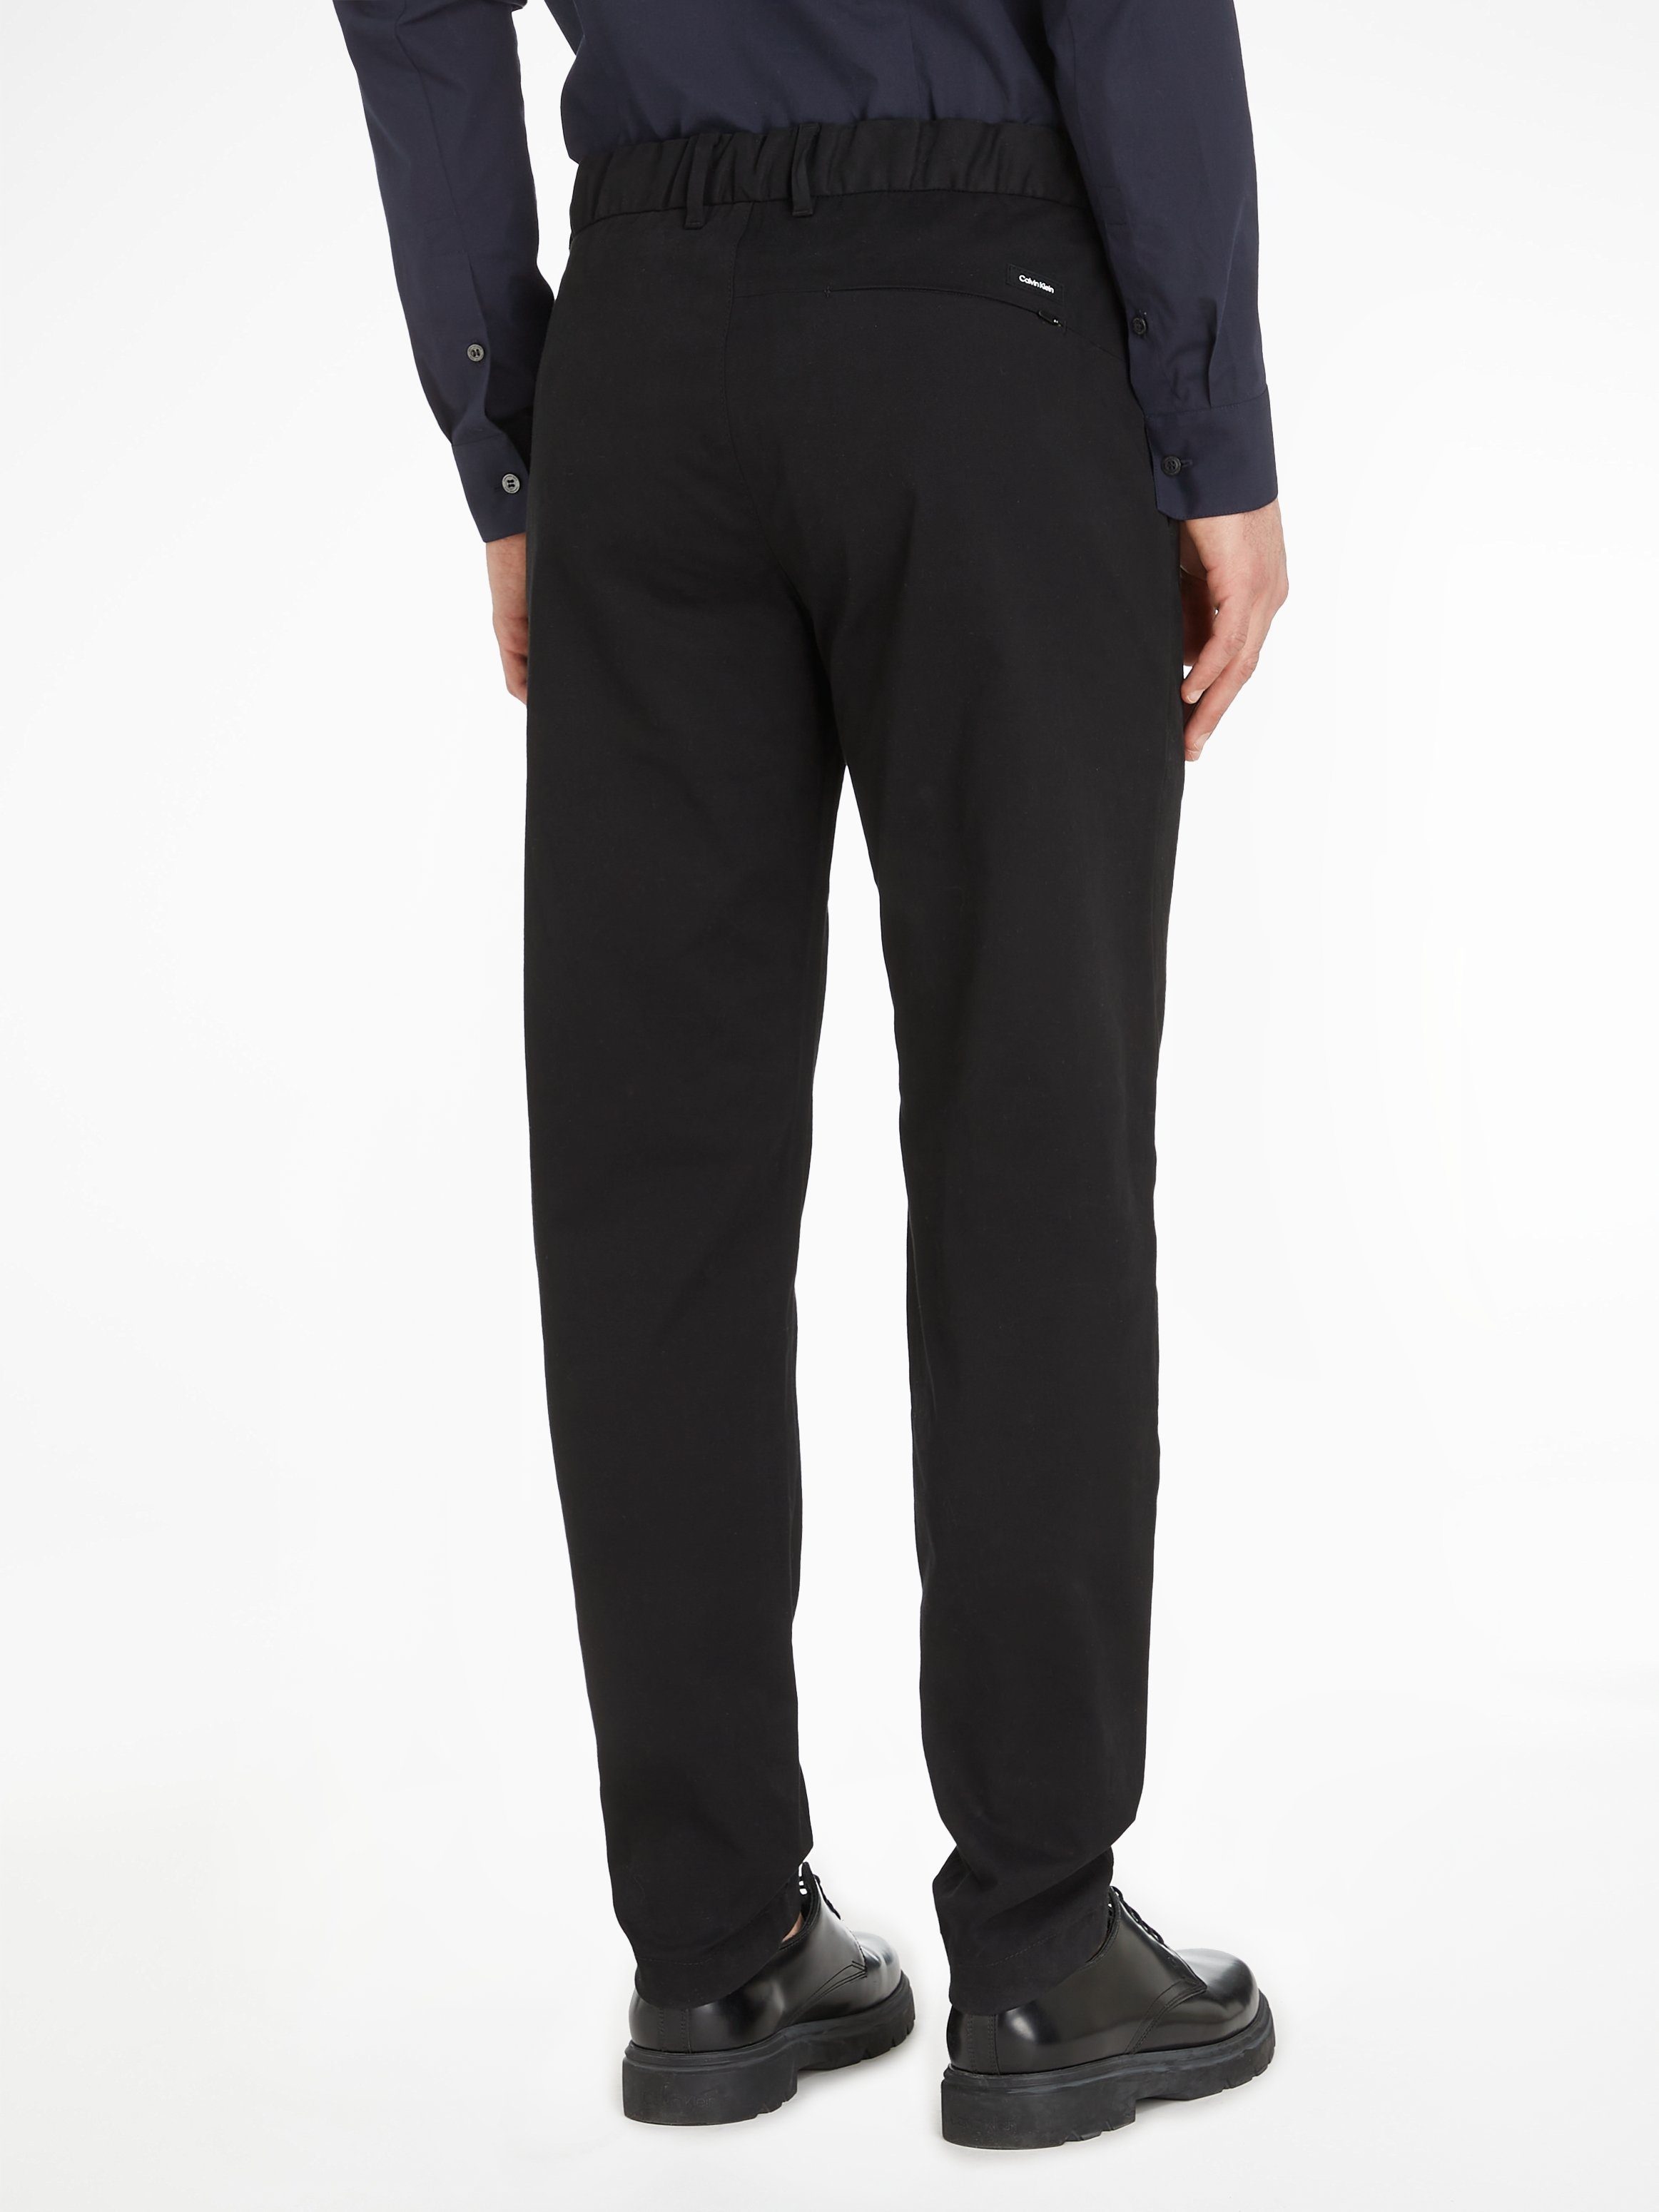 Klein MODERN Calvin TAPERED Stretch-Hose TWILL PANT